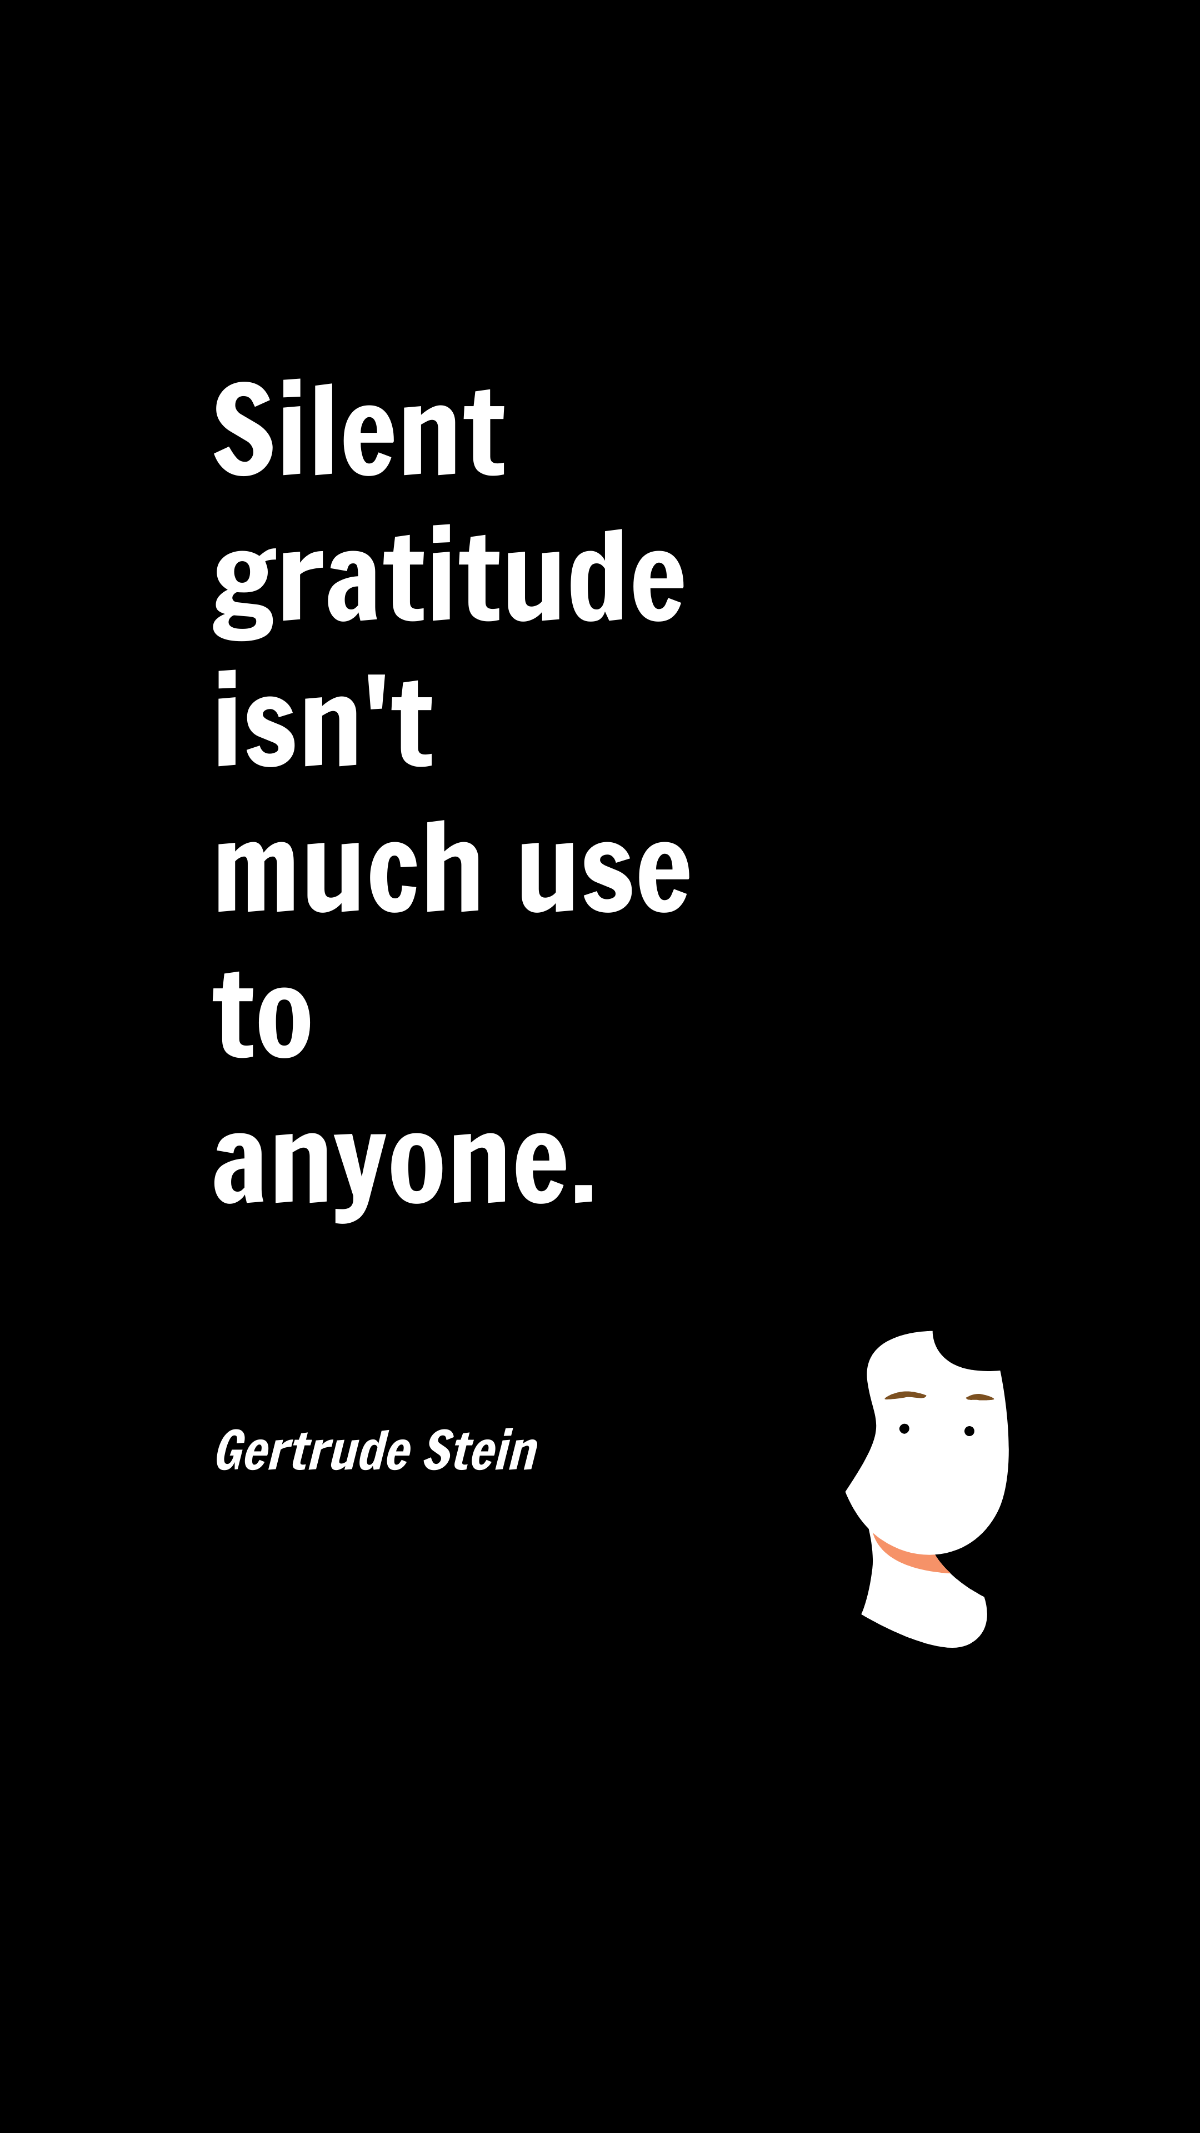 Free Gertrude Stein - Silent gratitude isn't much use to anyone. Template